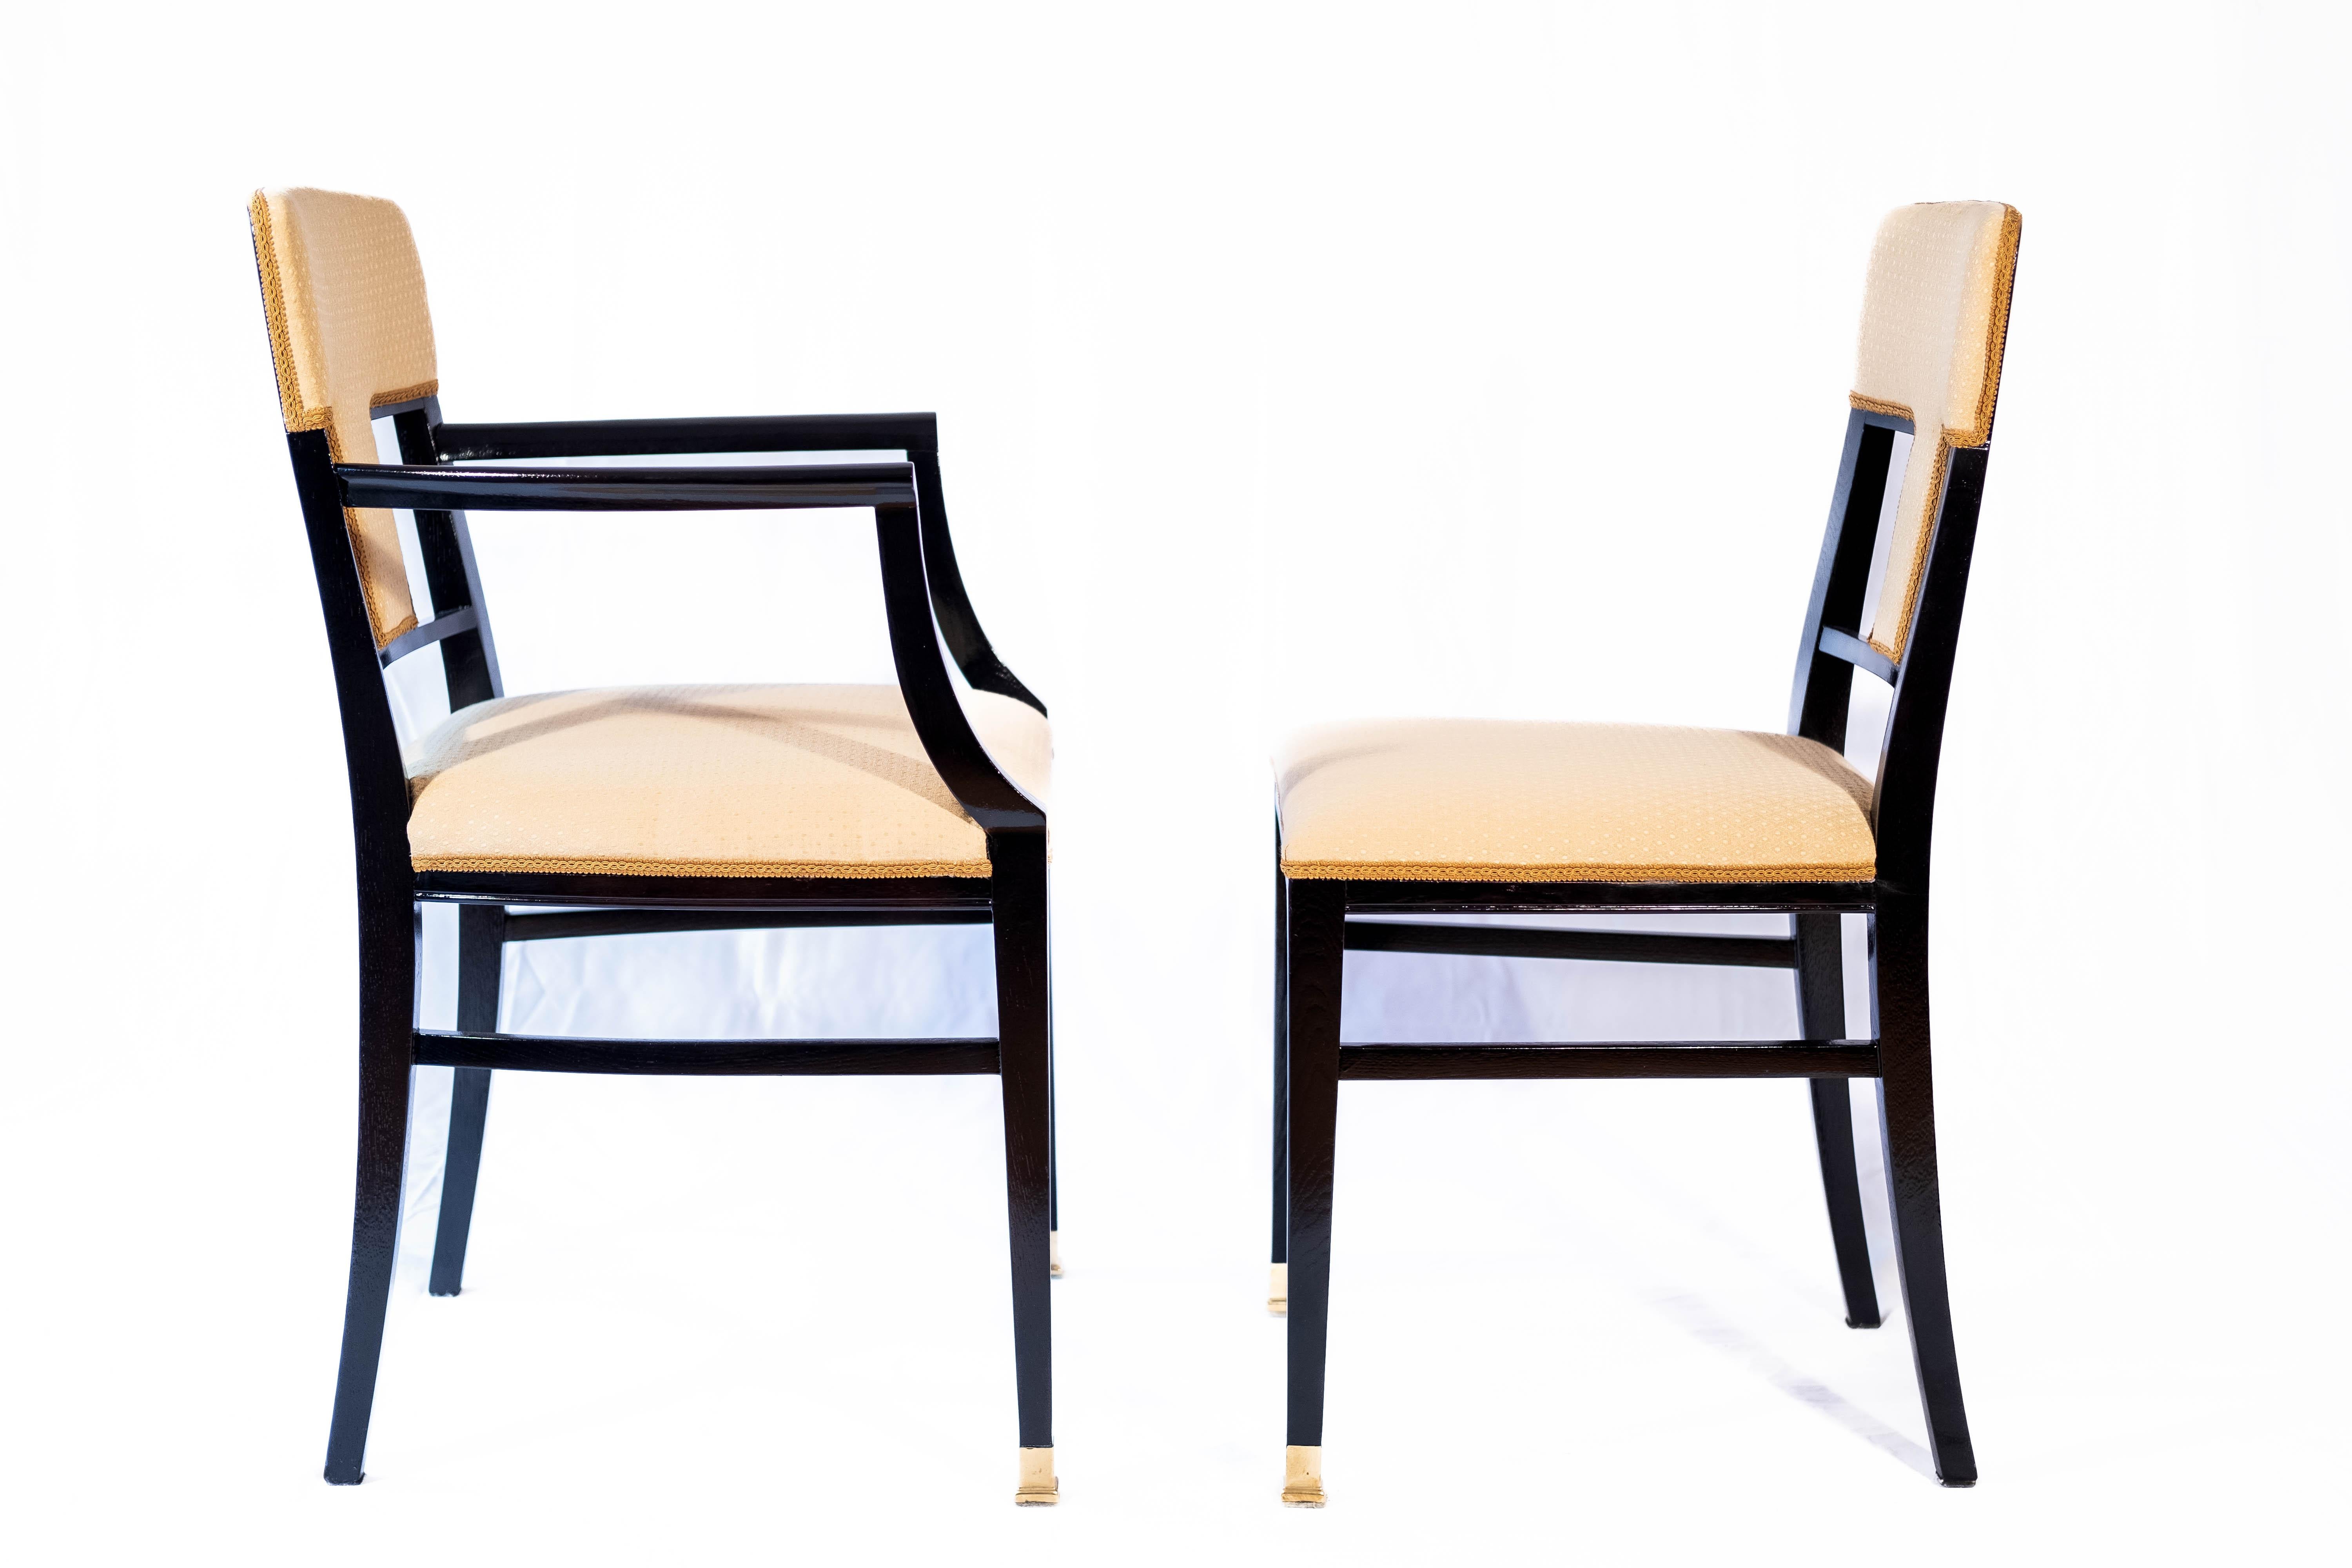 3 Art Nouveau Chairs by Andreas Weber (Vienna, 1910) For Sale 2